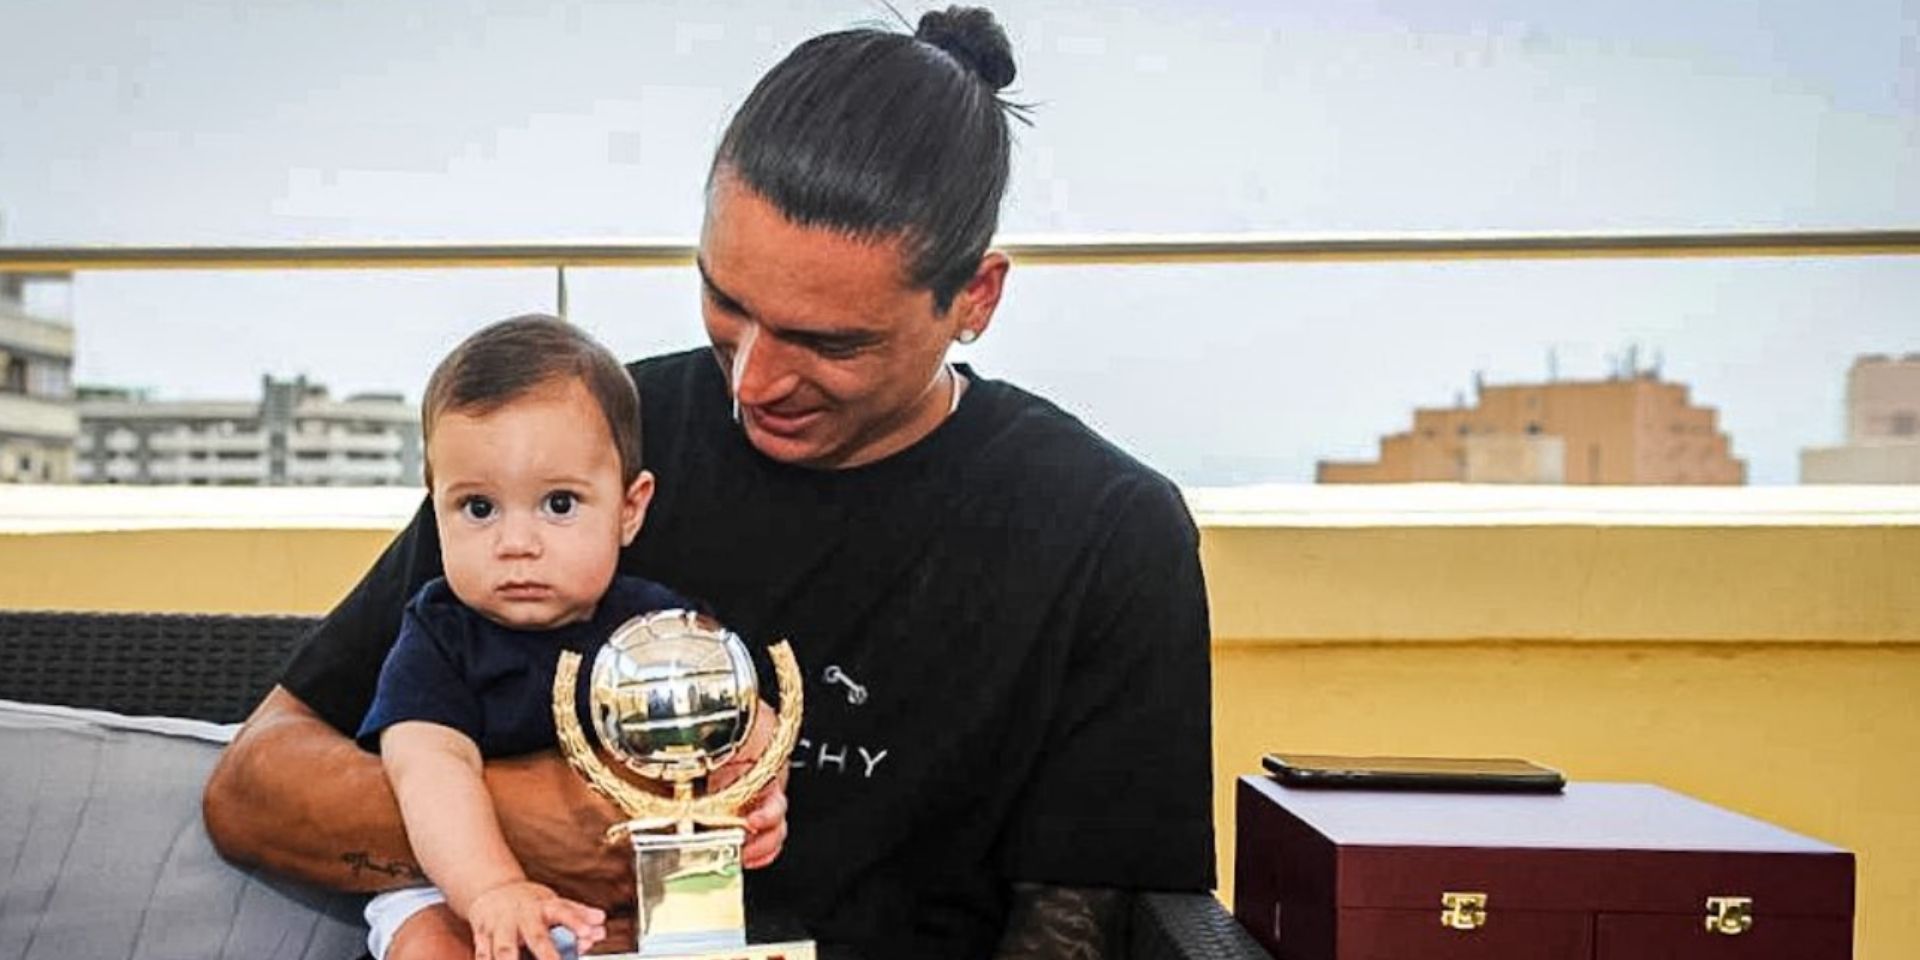 (Images) Darwin Nunez poses with the trophy and his son, as he’s handed silverware for being top scorer in Portugal